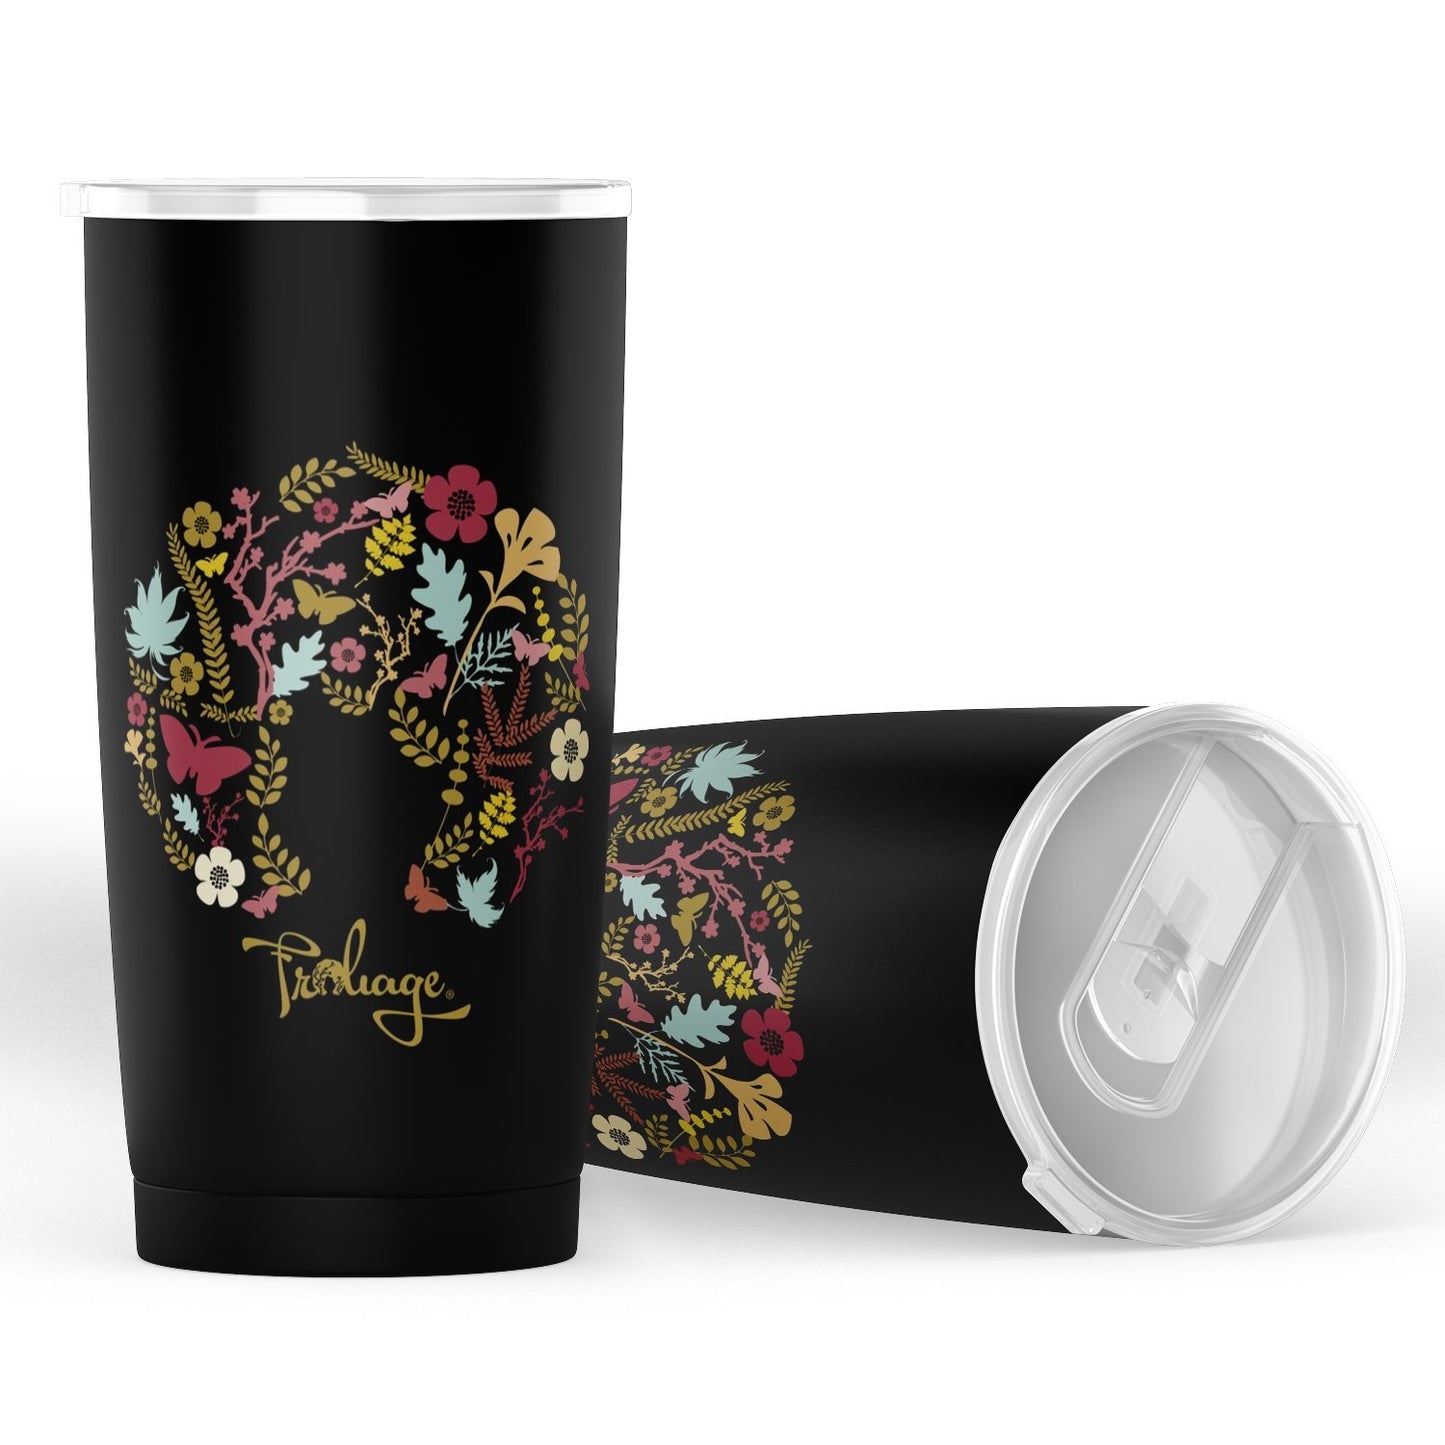 Froliage Tumbler - Froliage